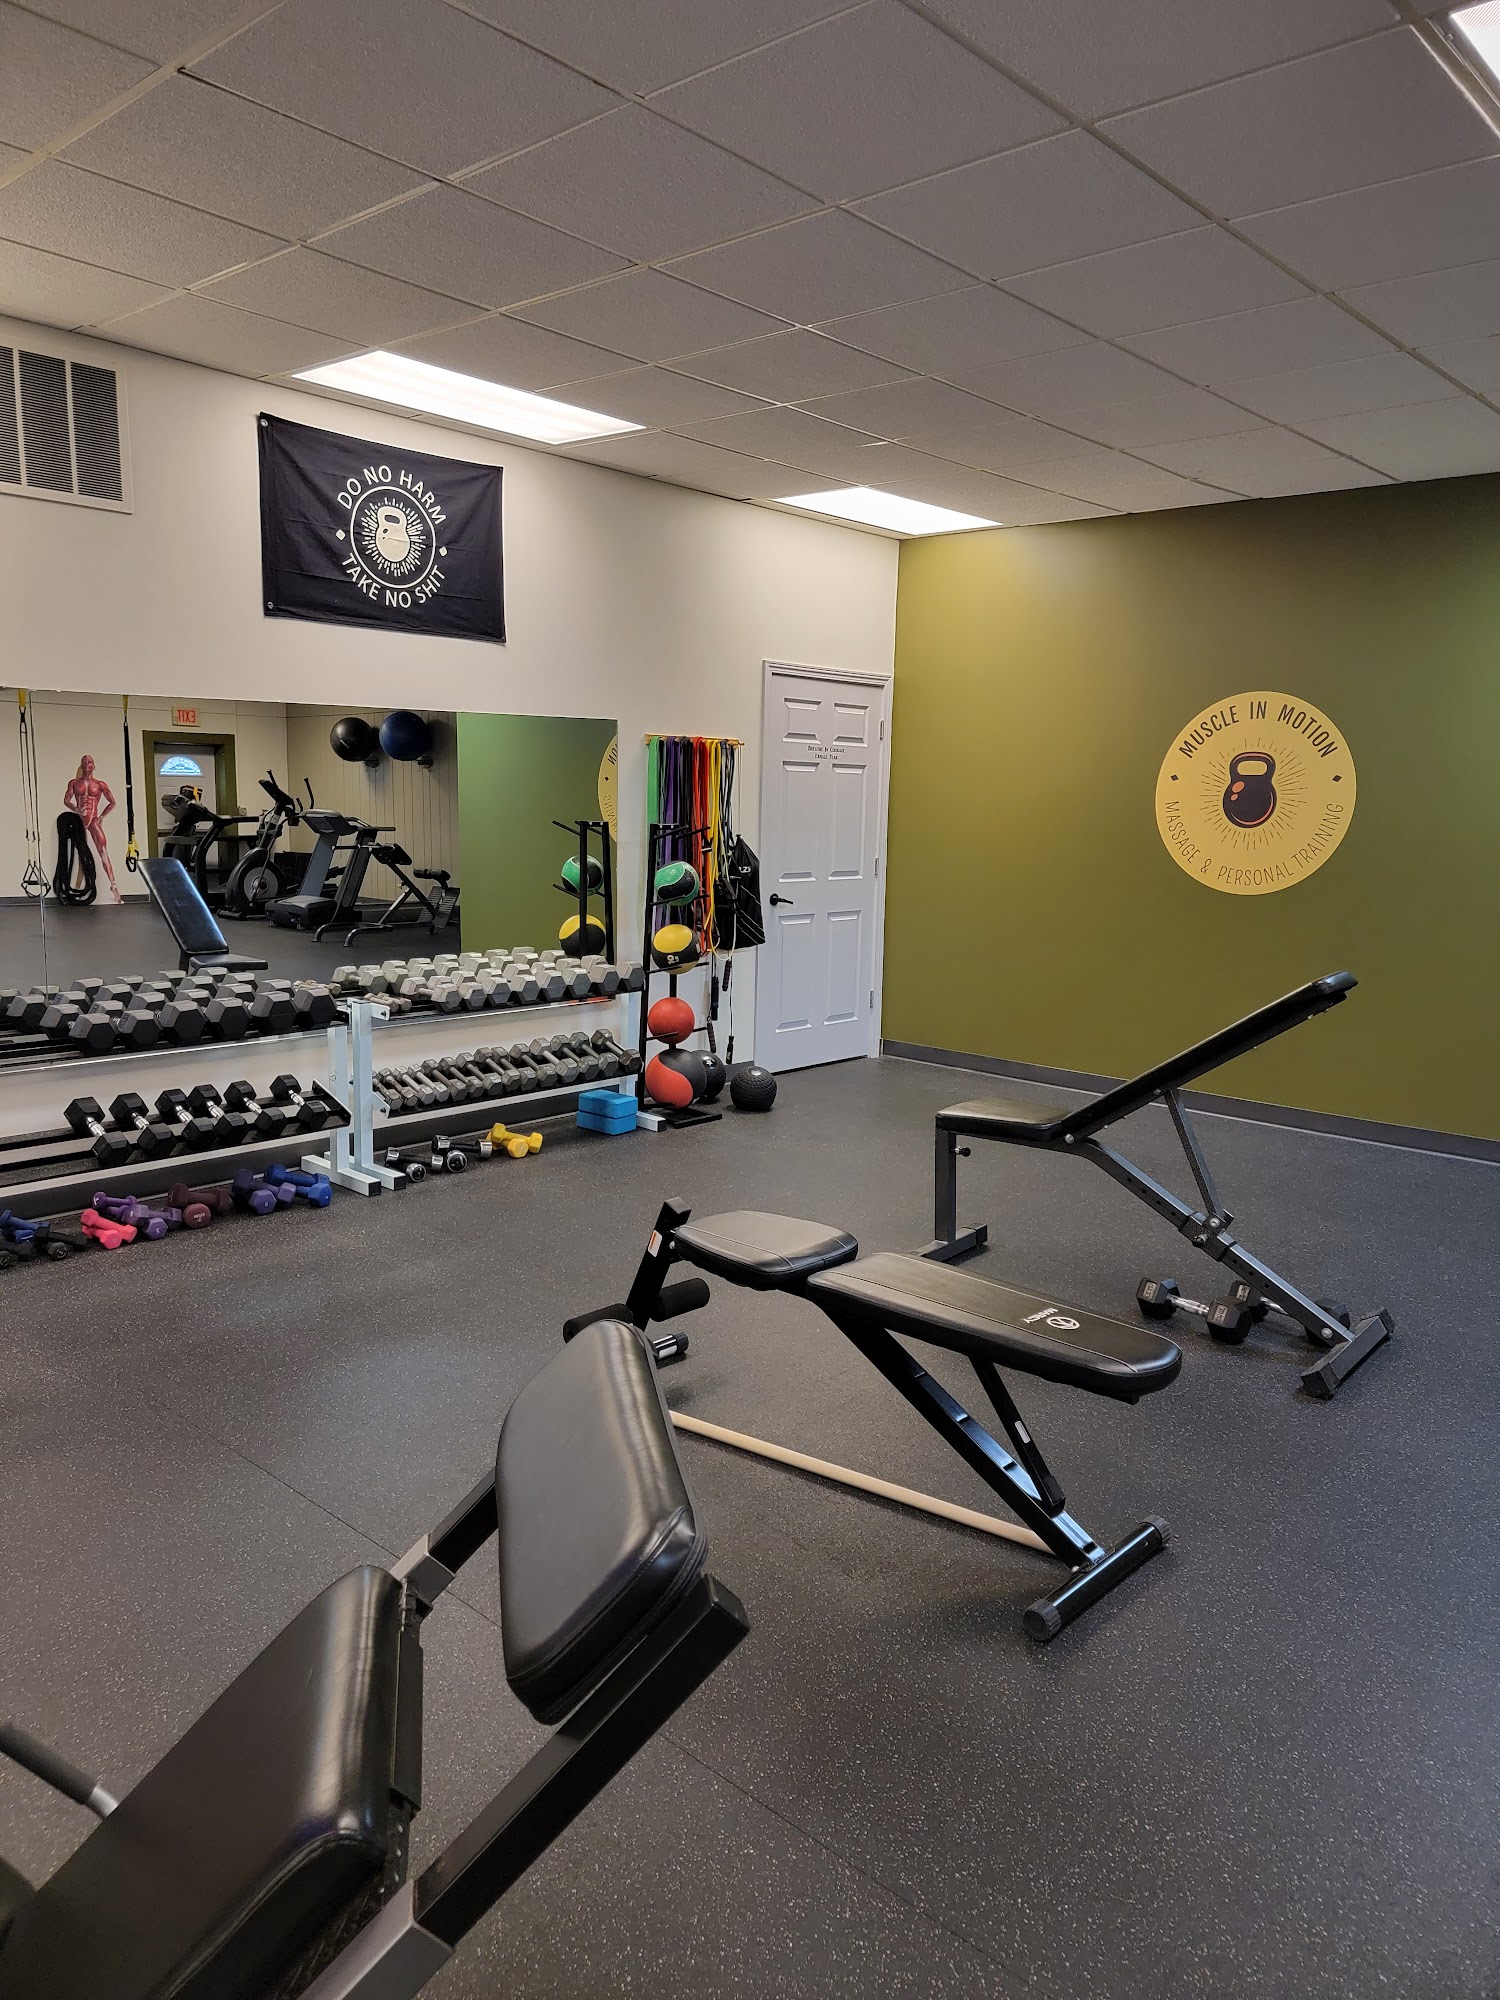 Muscle in Motion Massage & Personal Training 203 W Main St, Rochester Wisconsin 53167